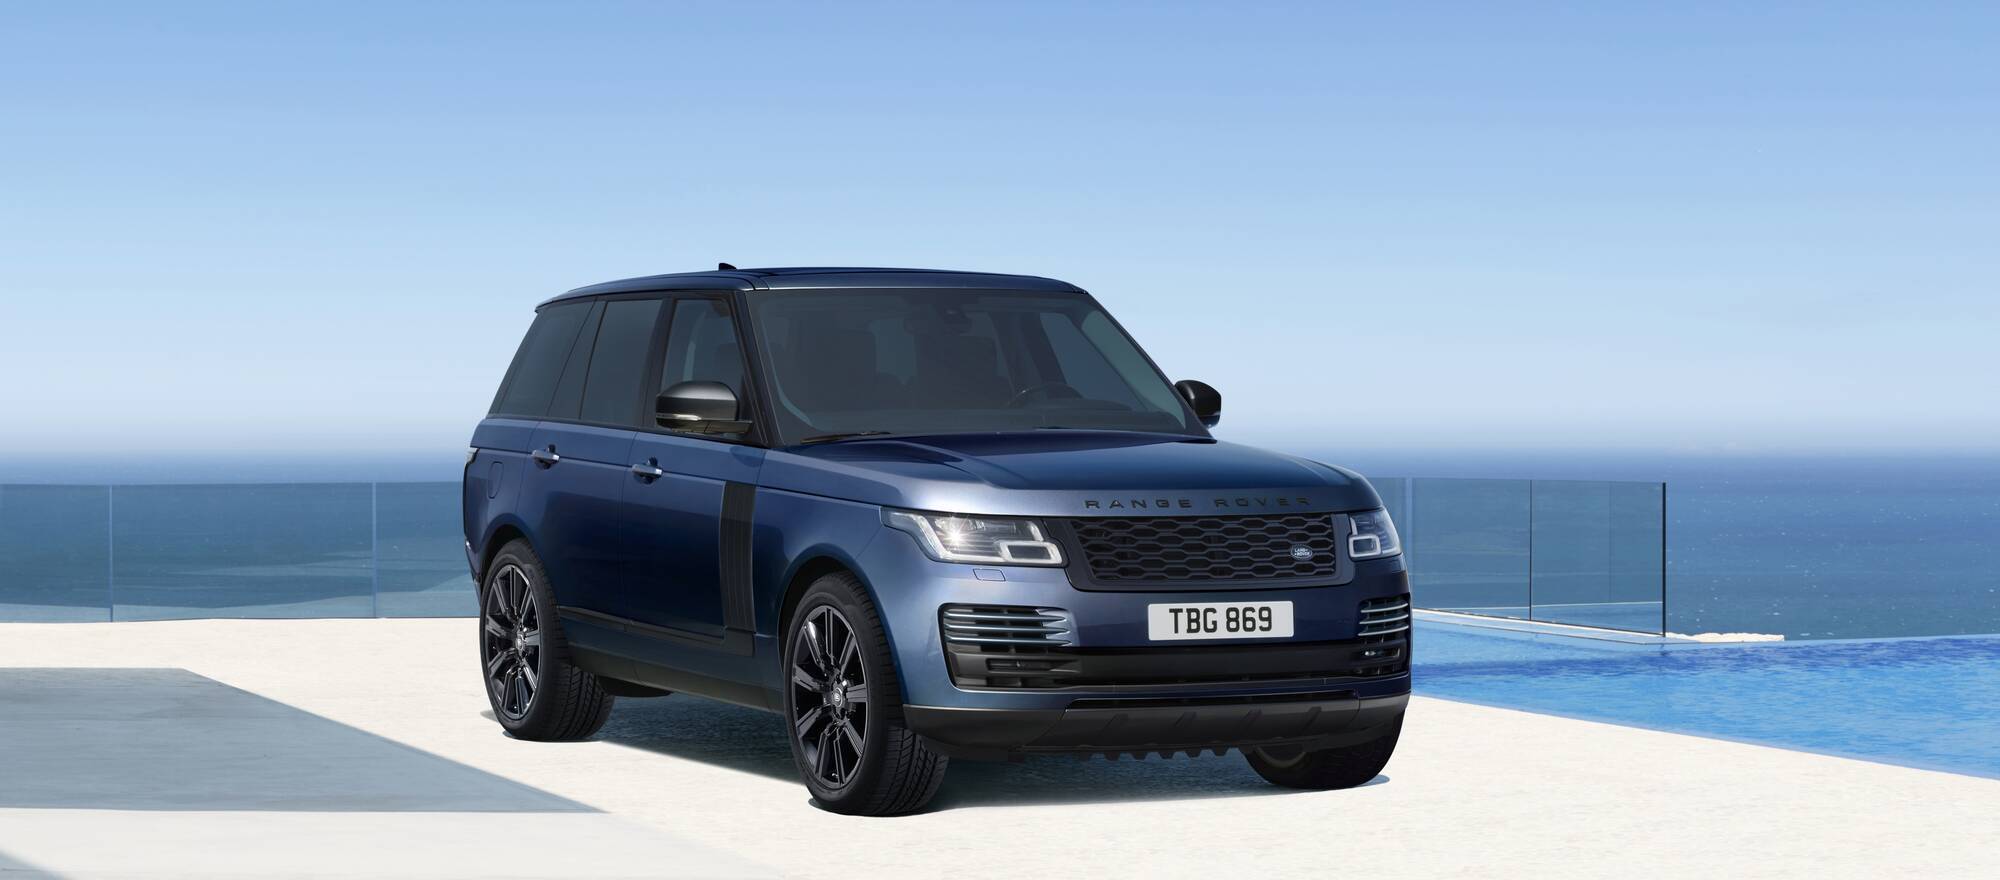 2021 Range Rover Westminster Edition. Фото: